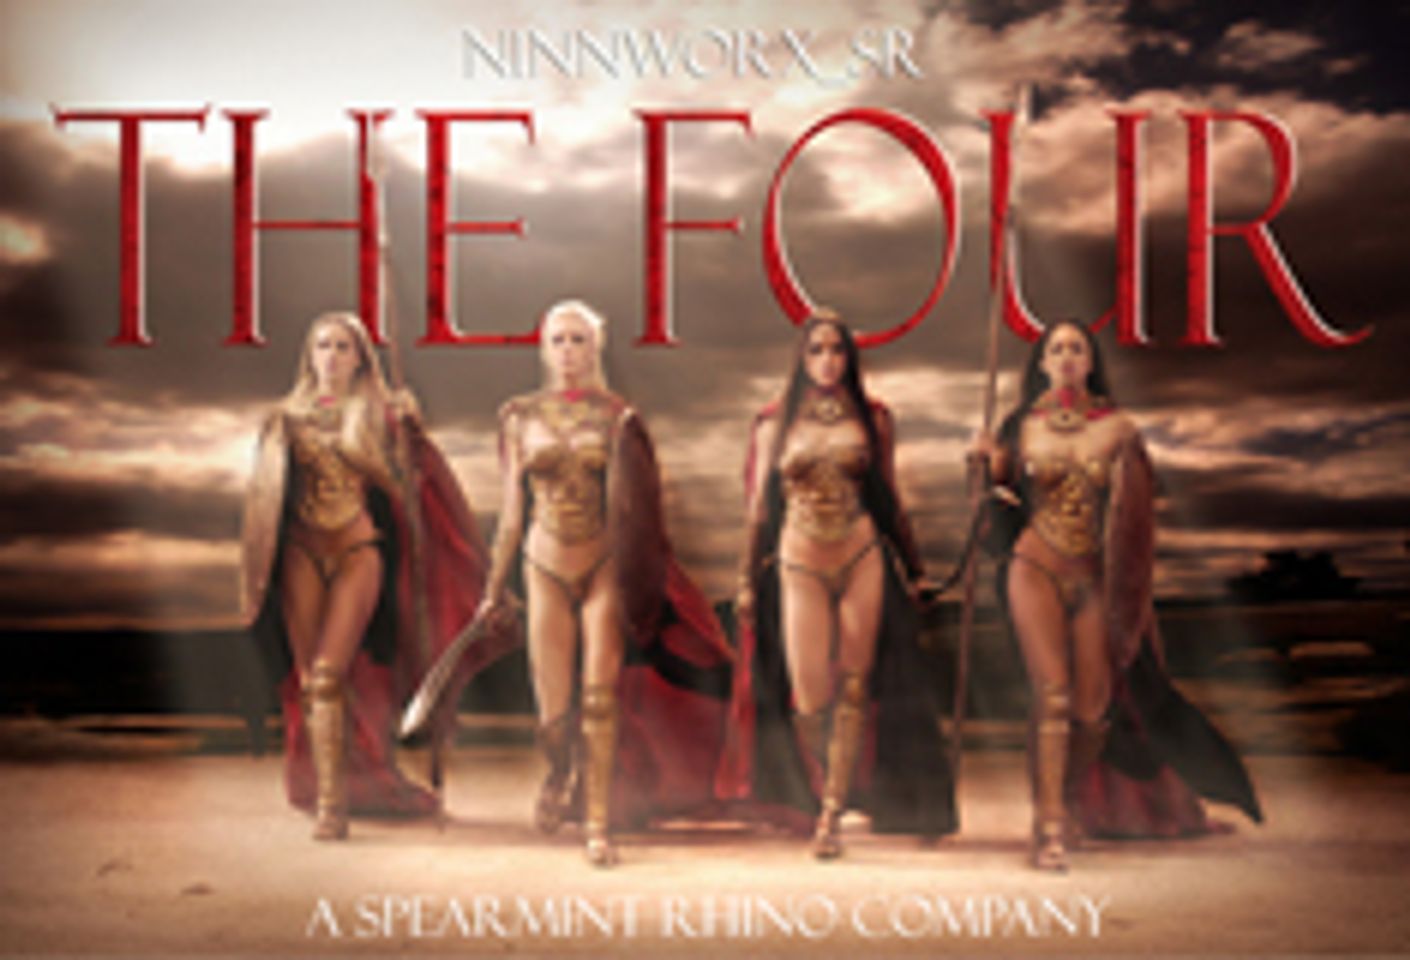 NinnWorx_SR Plans Aug. 16 Release Party for 'The Four'